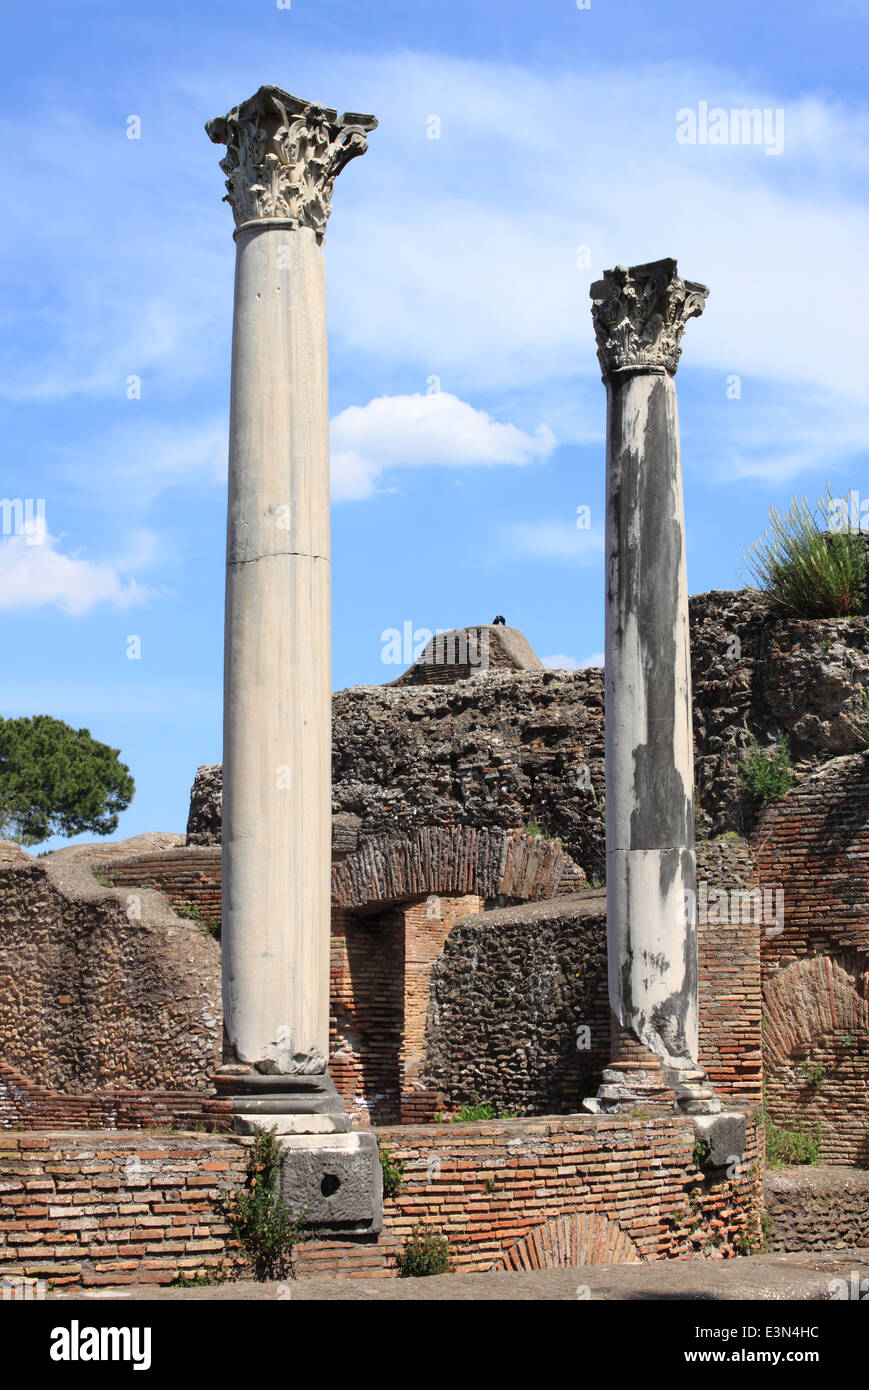 Columns of an ancient roman temple in Ostia Antica, the old harbour of Rome, Italy Stock Photo